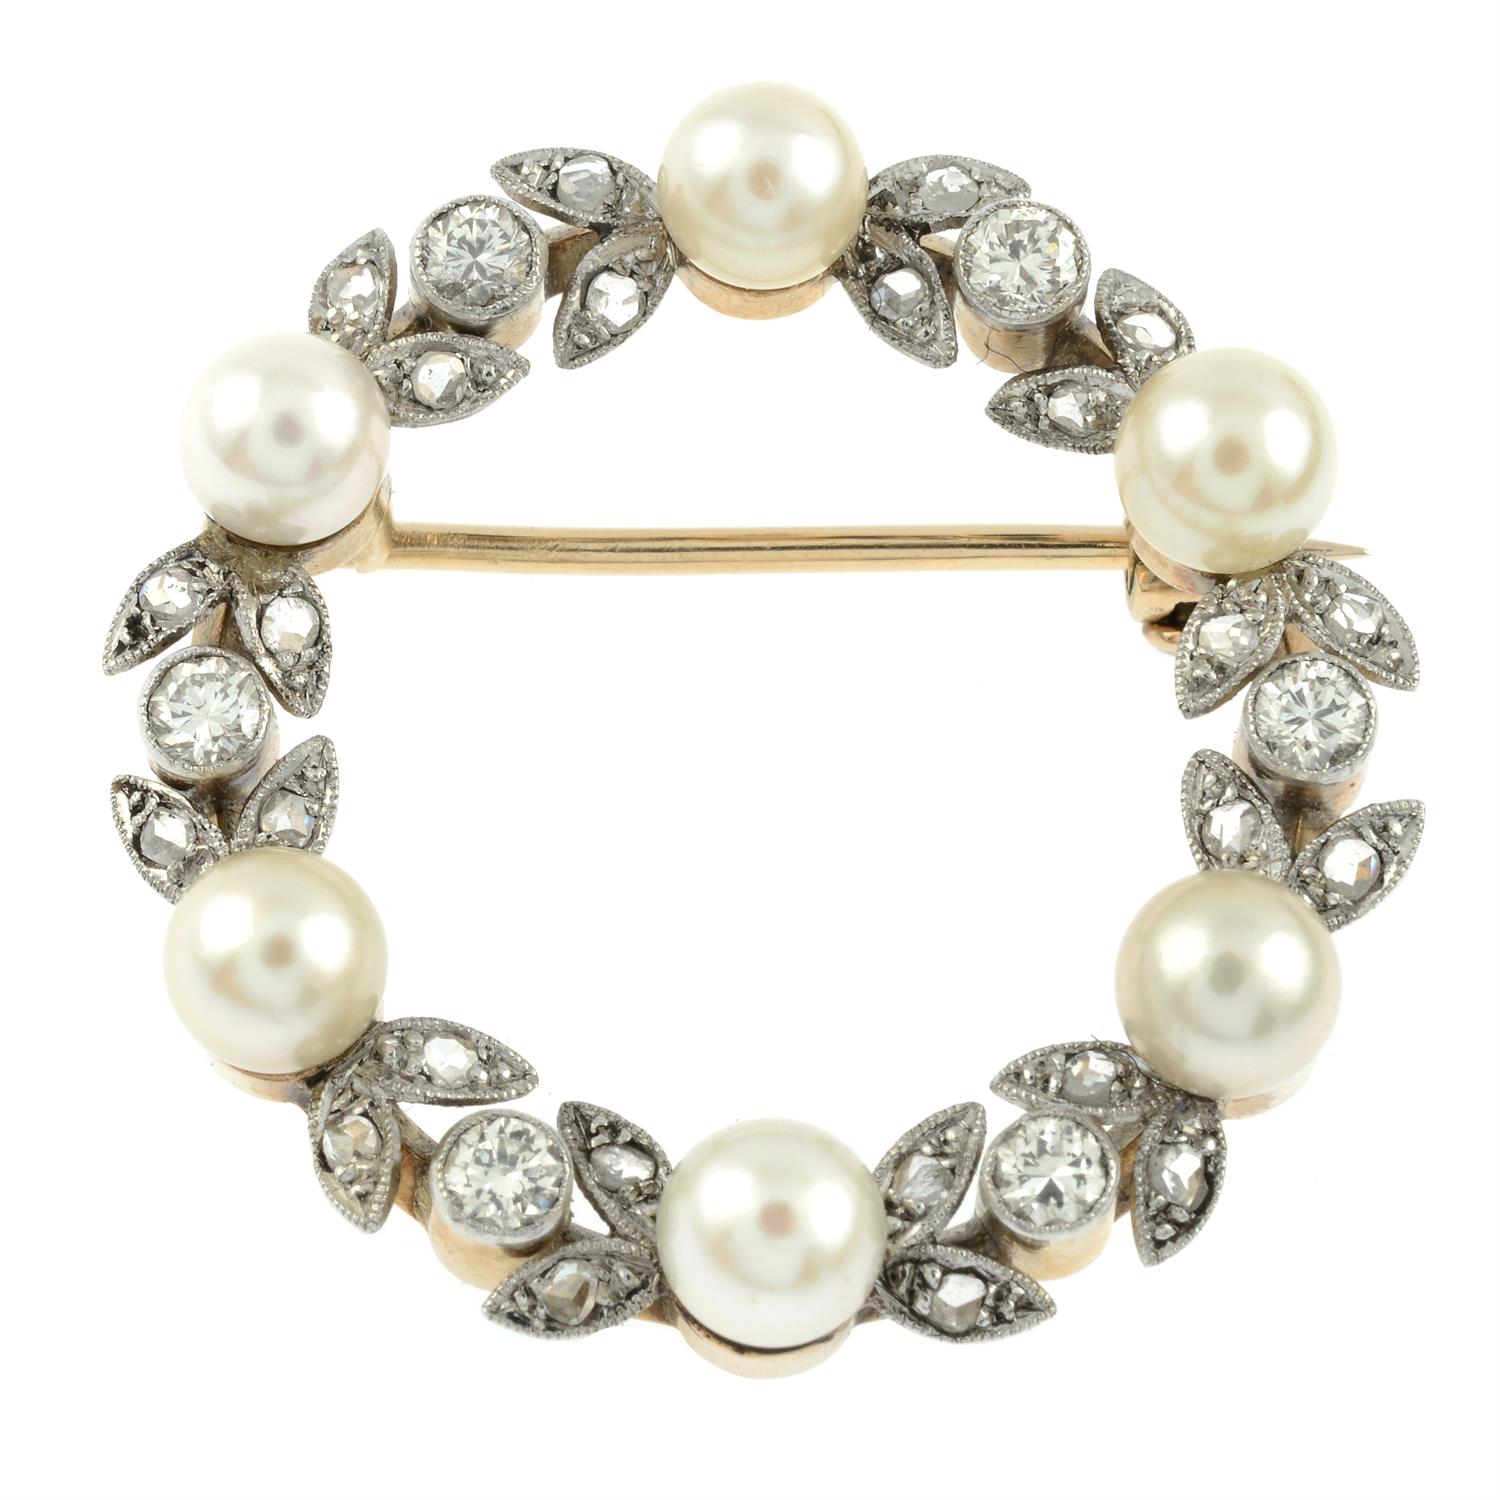 A mid 20th century platinum and 14ct gold cultured pearl and vari-cut diamond wreath brooch. - Image 2 of 4